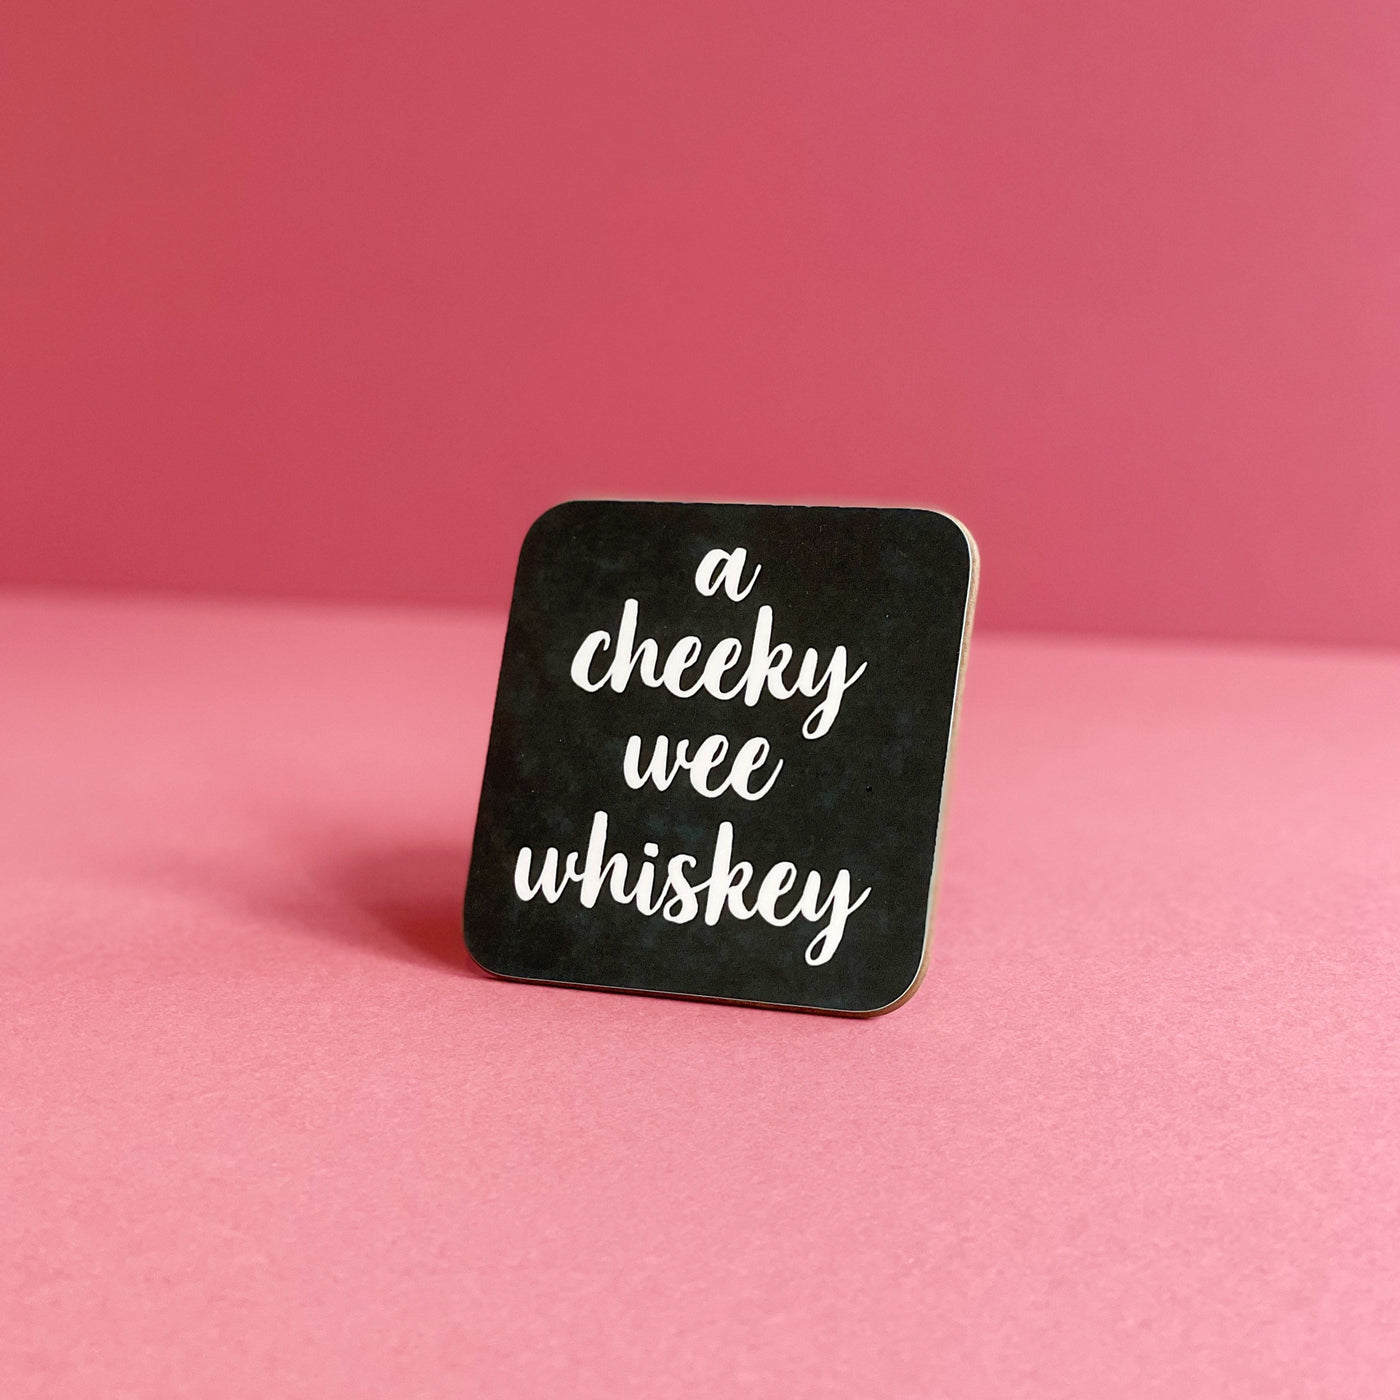 A Cheeky Wee Whiskey Coaster